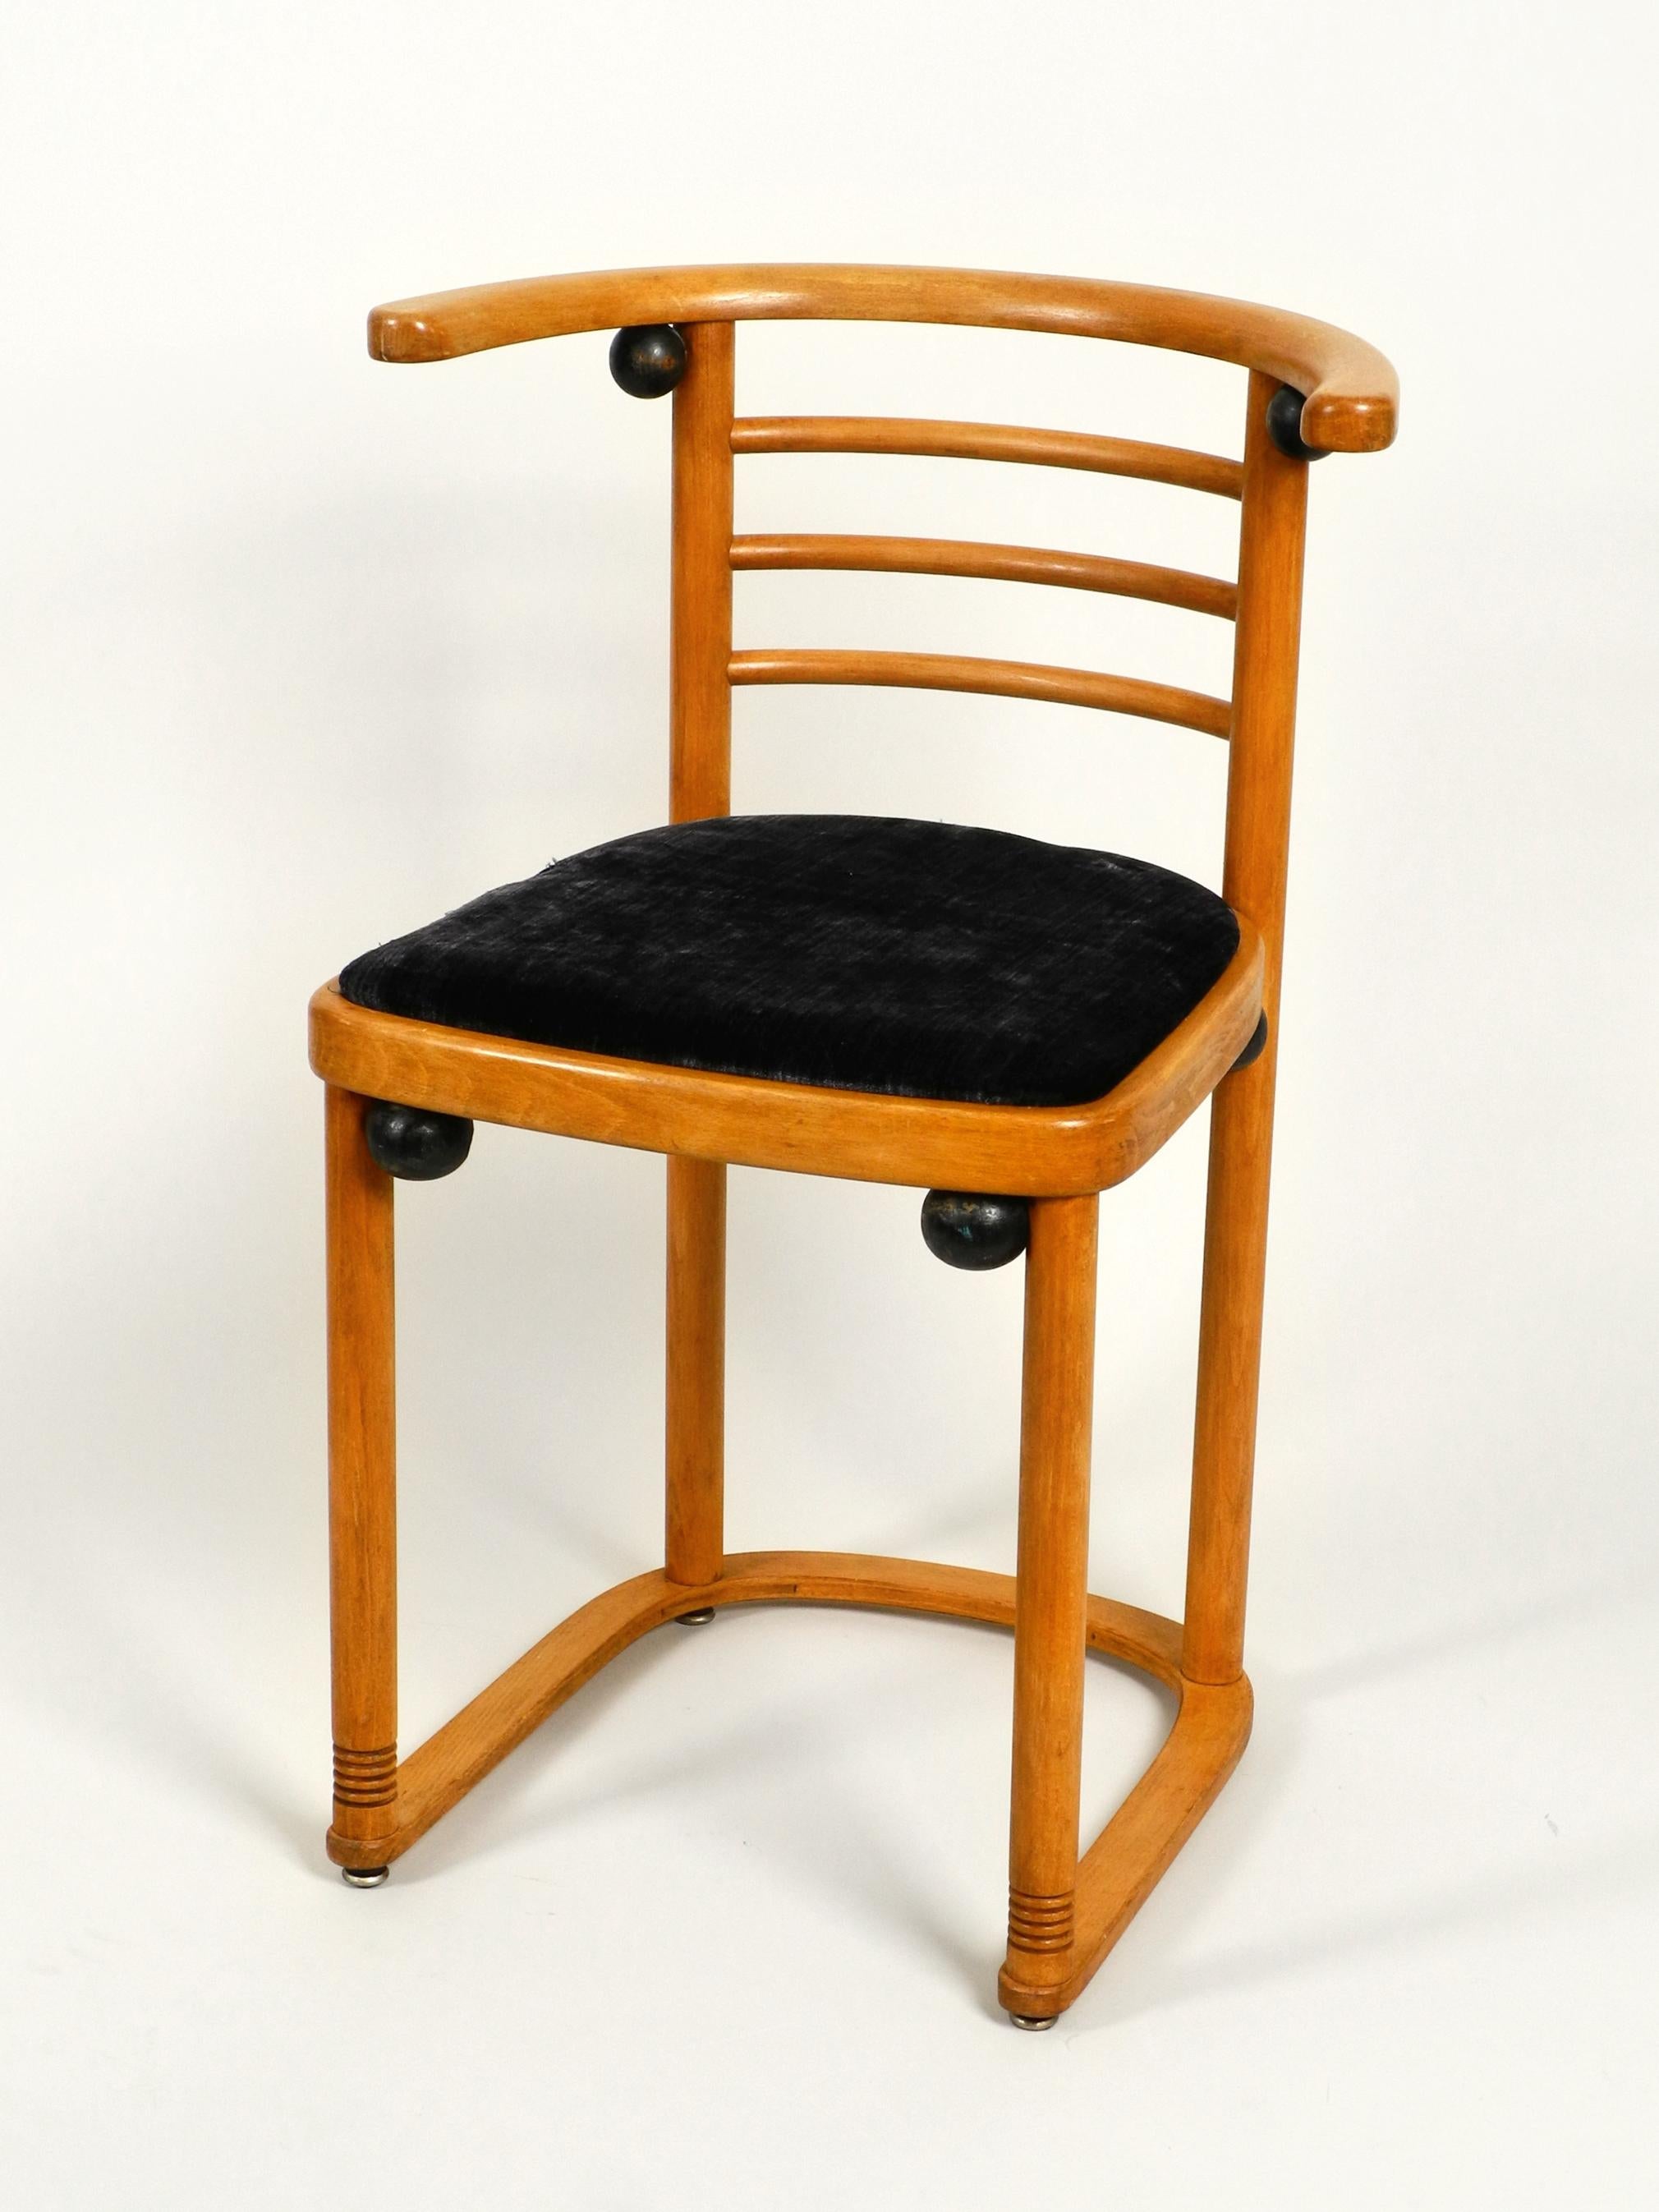 Original Josef Hoffmann bat chair made of oakwood. 
Designed in the 1930s in Art Deco style.
Manufactured by Wittmann in the 1950s. Made in Austria. 
The chair was developed by the well-known
 designer and architect Josef Hoffmann.
Hoffmann was